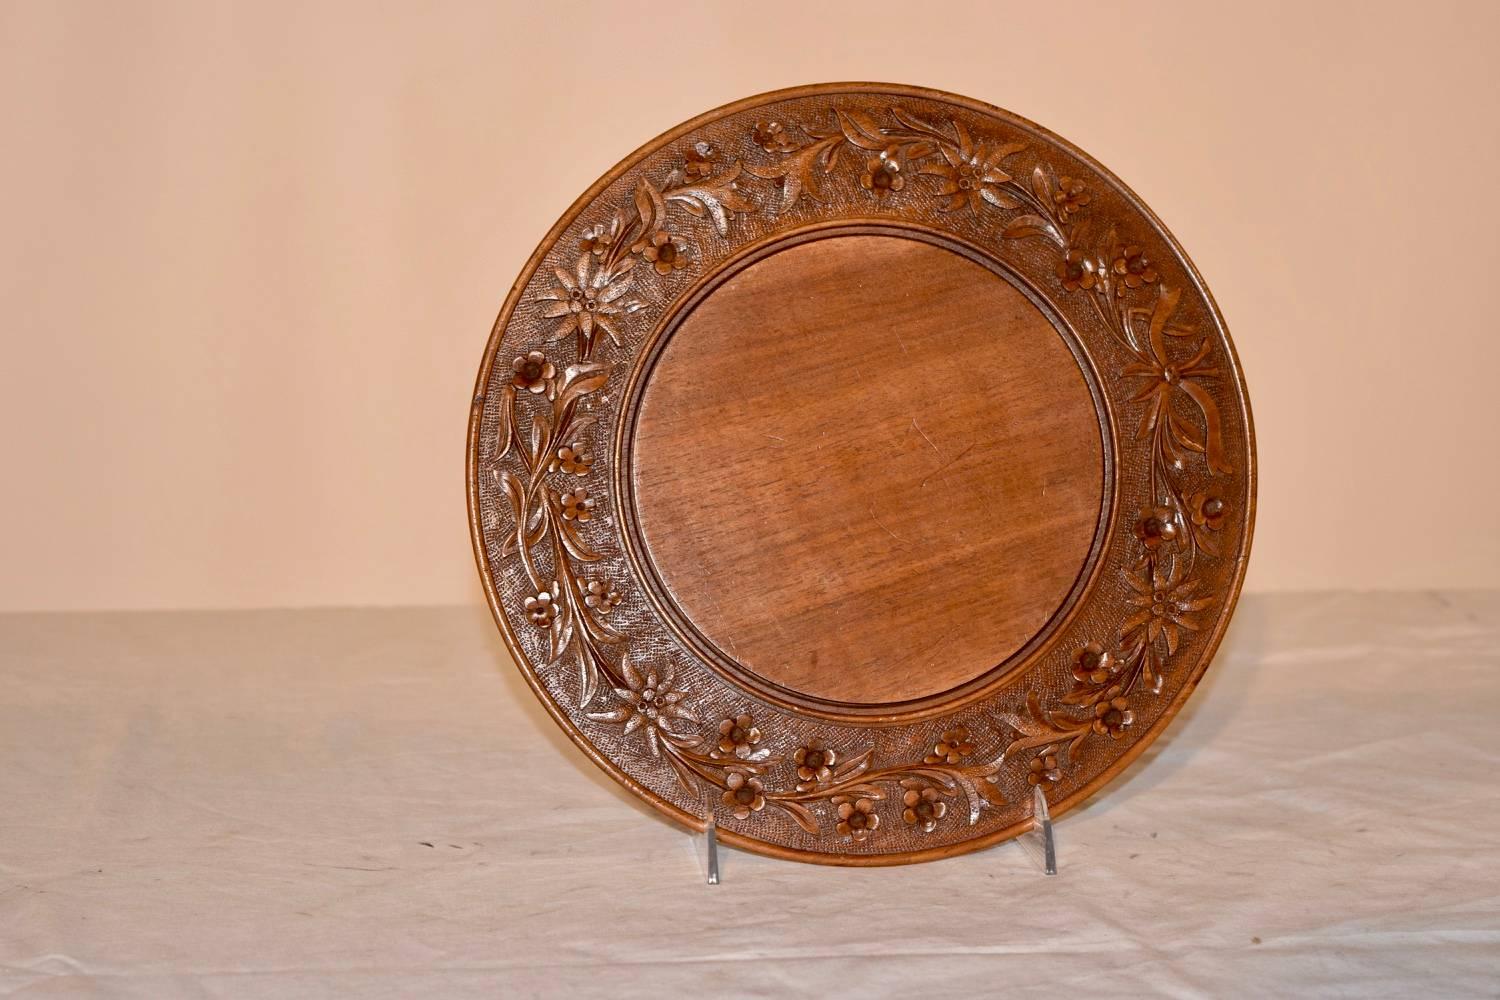 19th century Swiss bread board made from fruitwood. The front border is hand-carved with Edelweiss and flowers surrounding a central surface for cutting. The back is hand-turned.